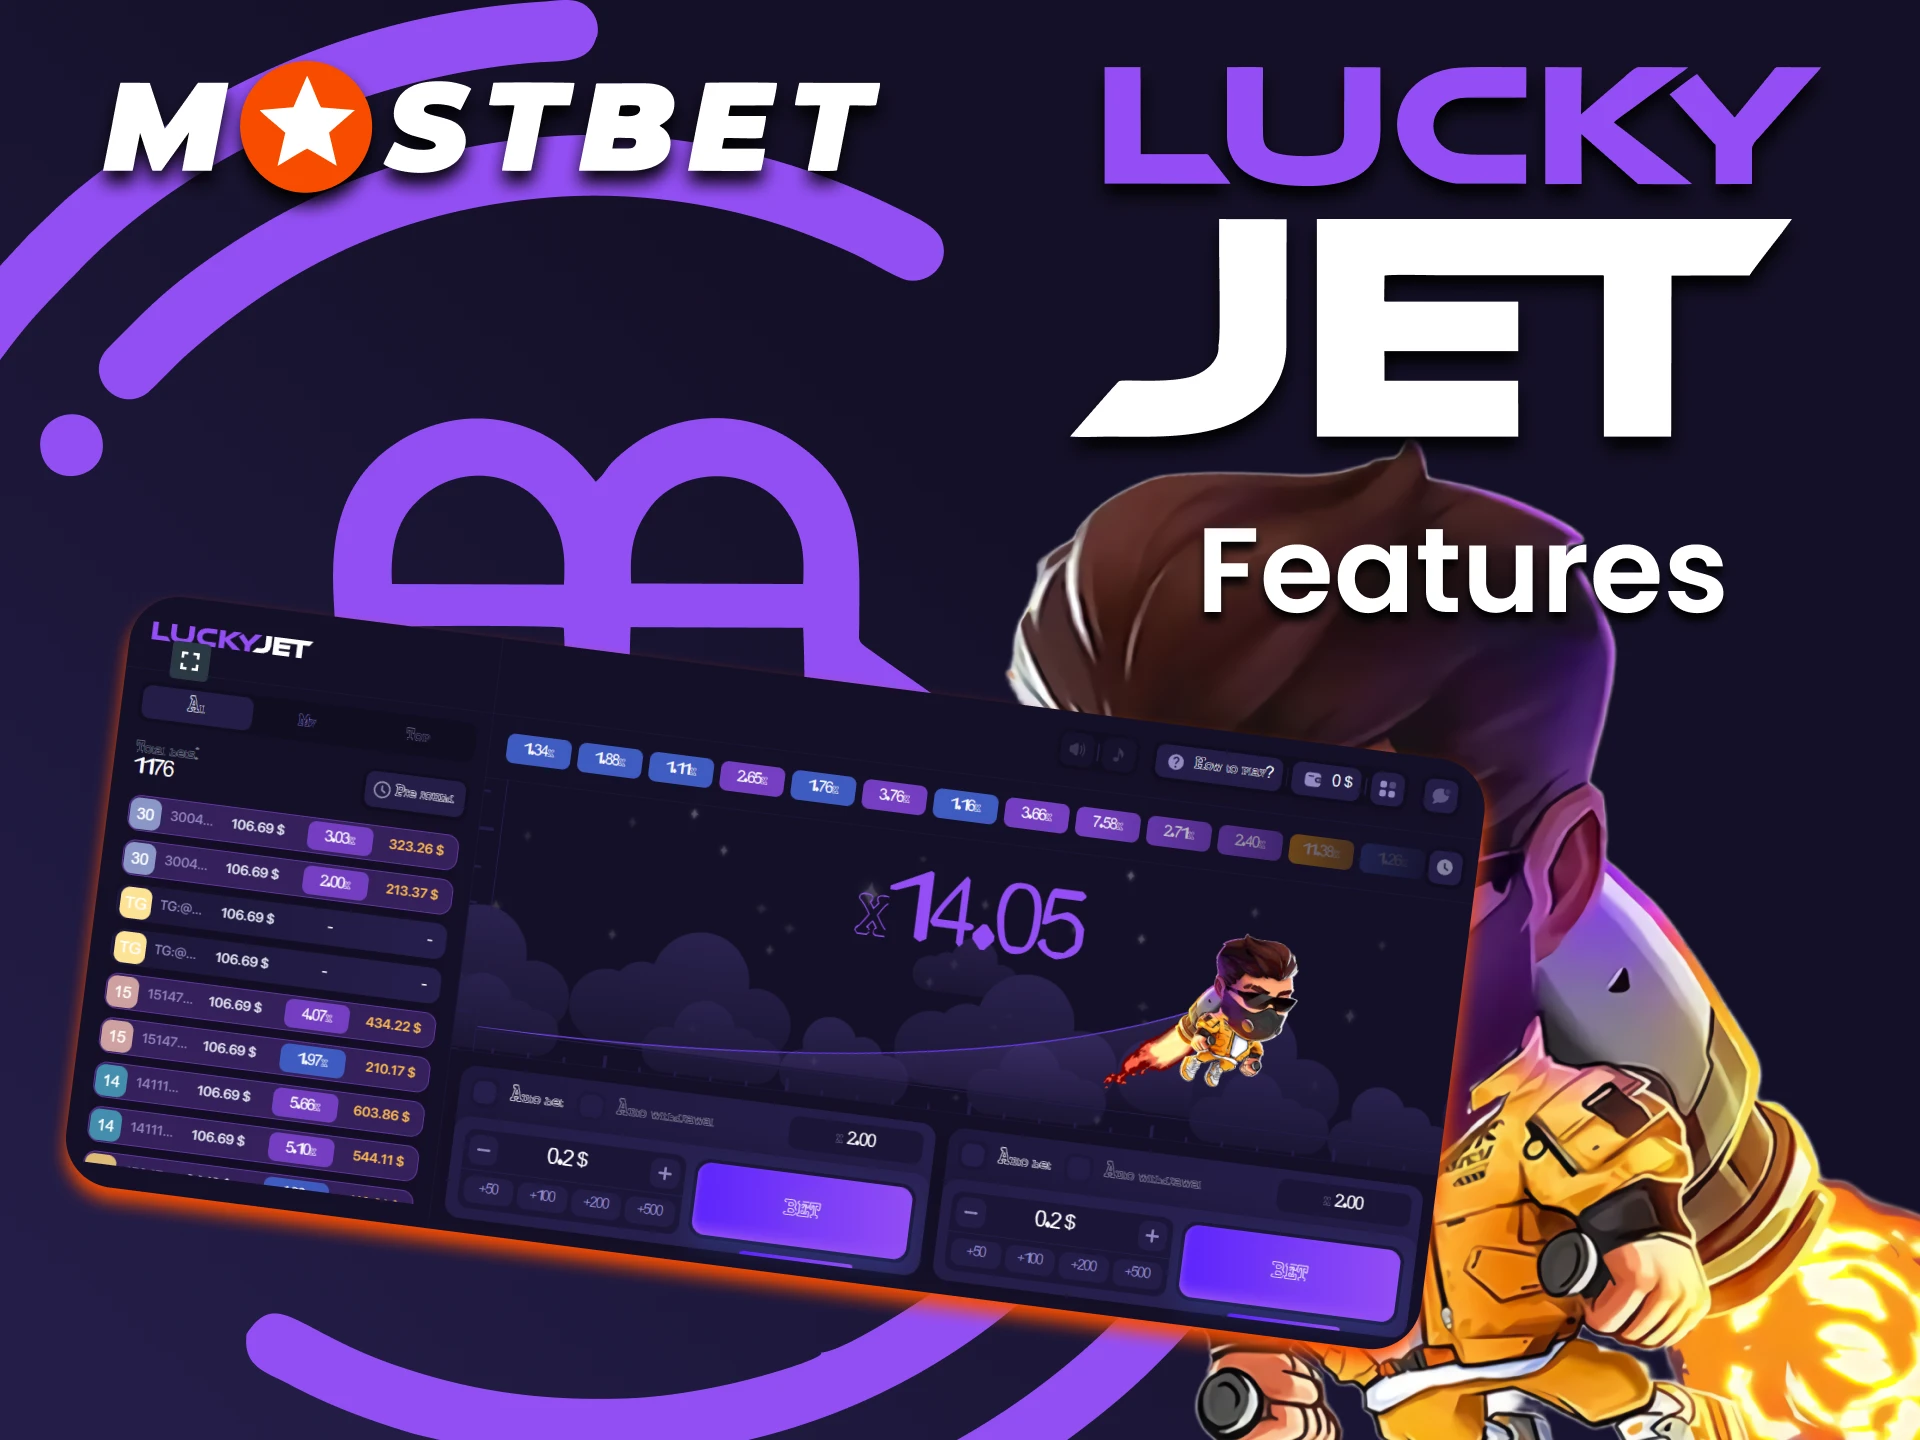 Find out what the future holds for Lucky Jet from Mostbet.